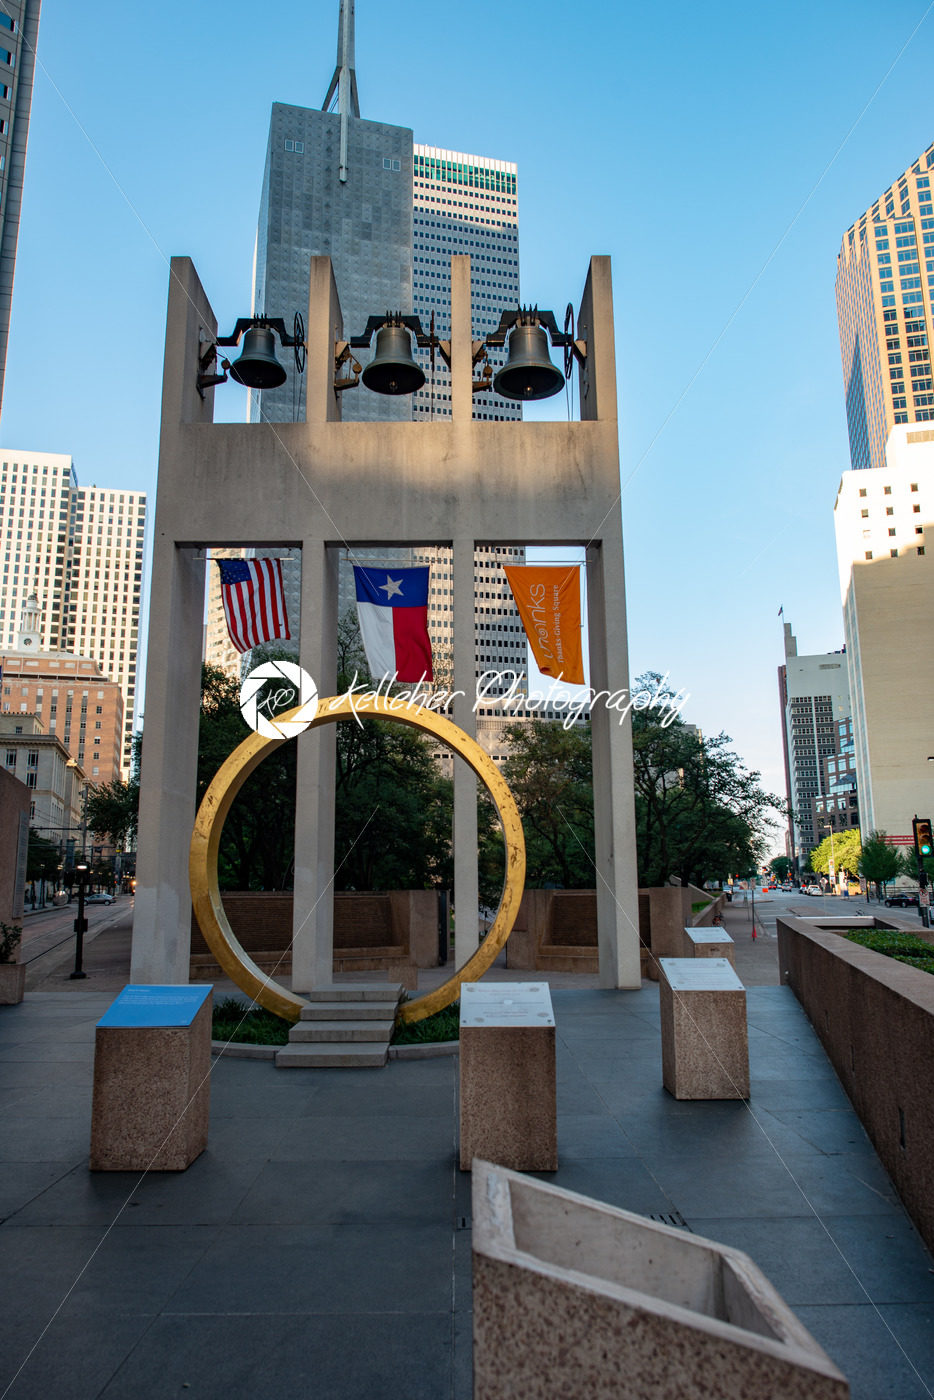 Dallas, Texas – May 7, 2018: Thanks-giving Square, in Dallas, Texas, hosts the non-denominational Thanks giving Chapel - Kelleher Photography Store